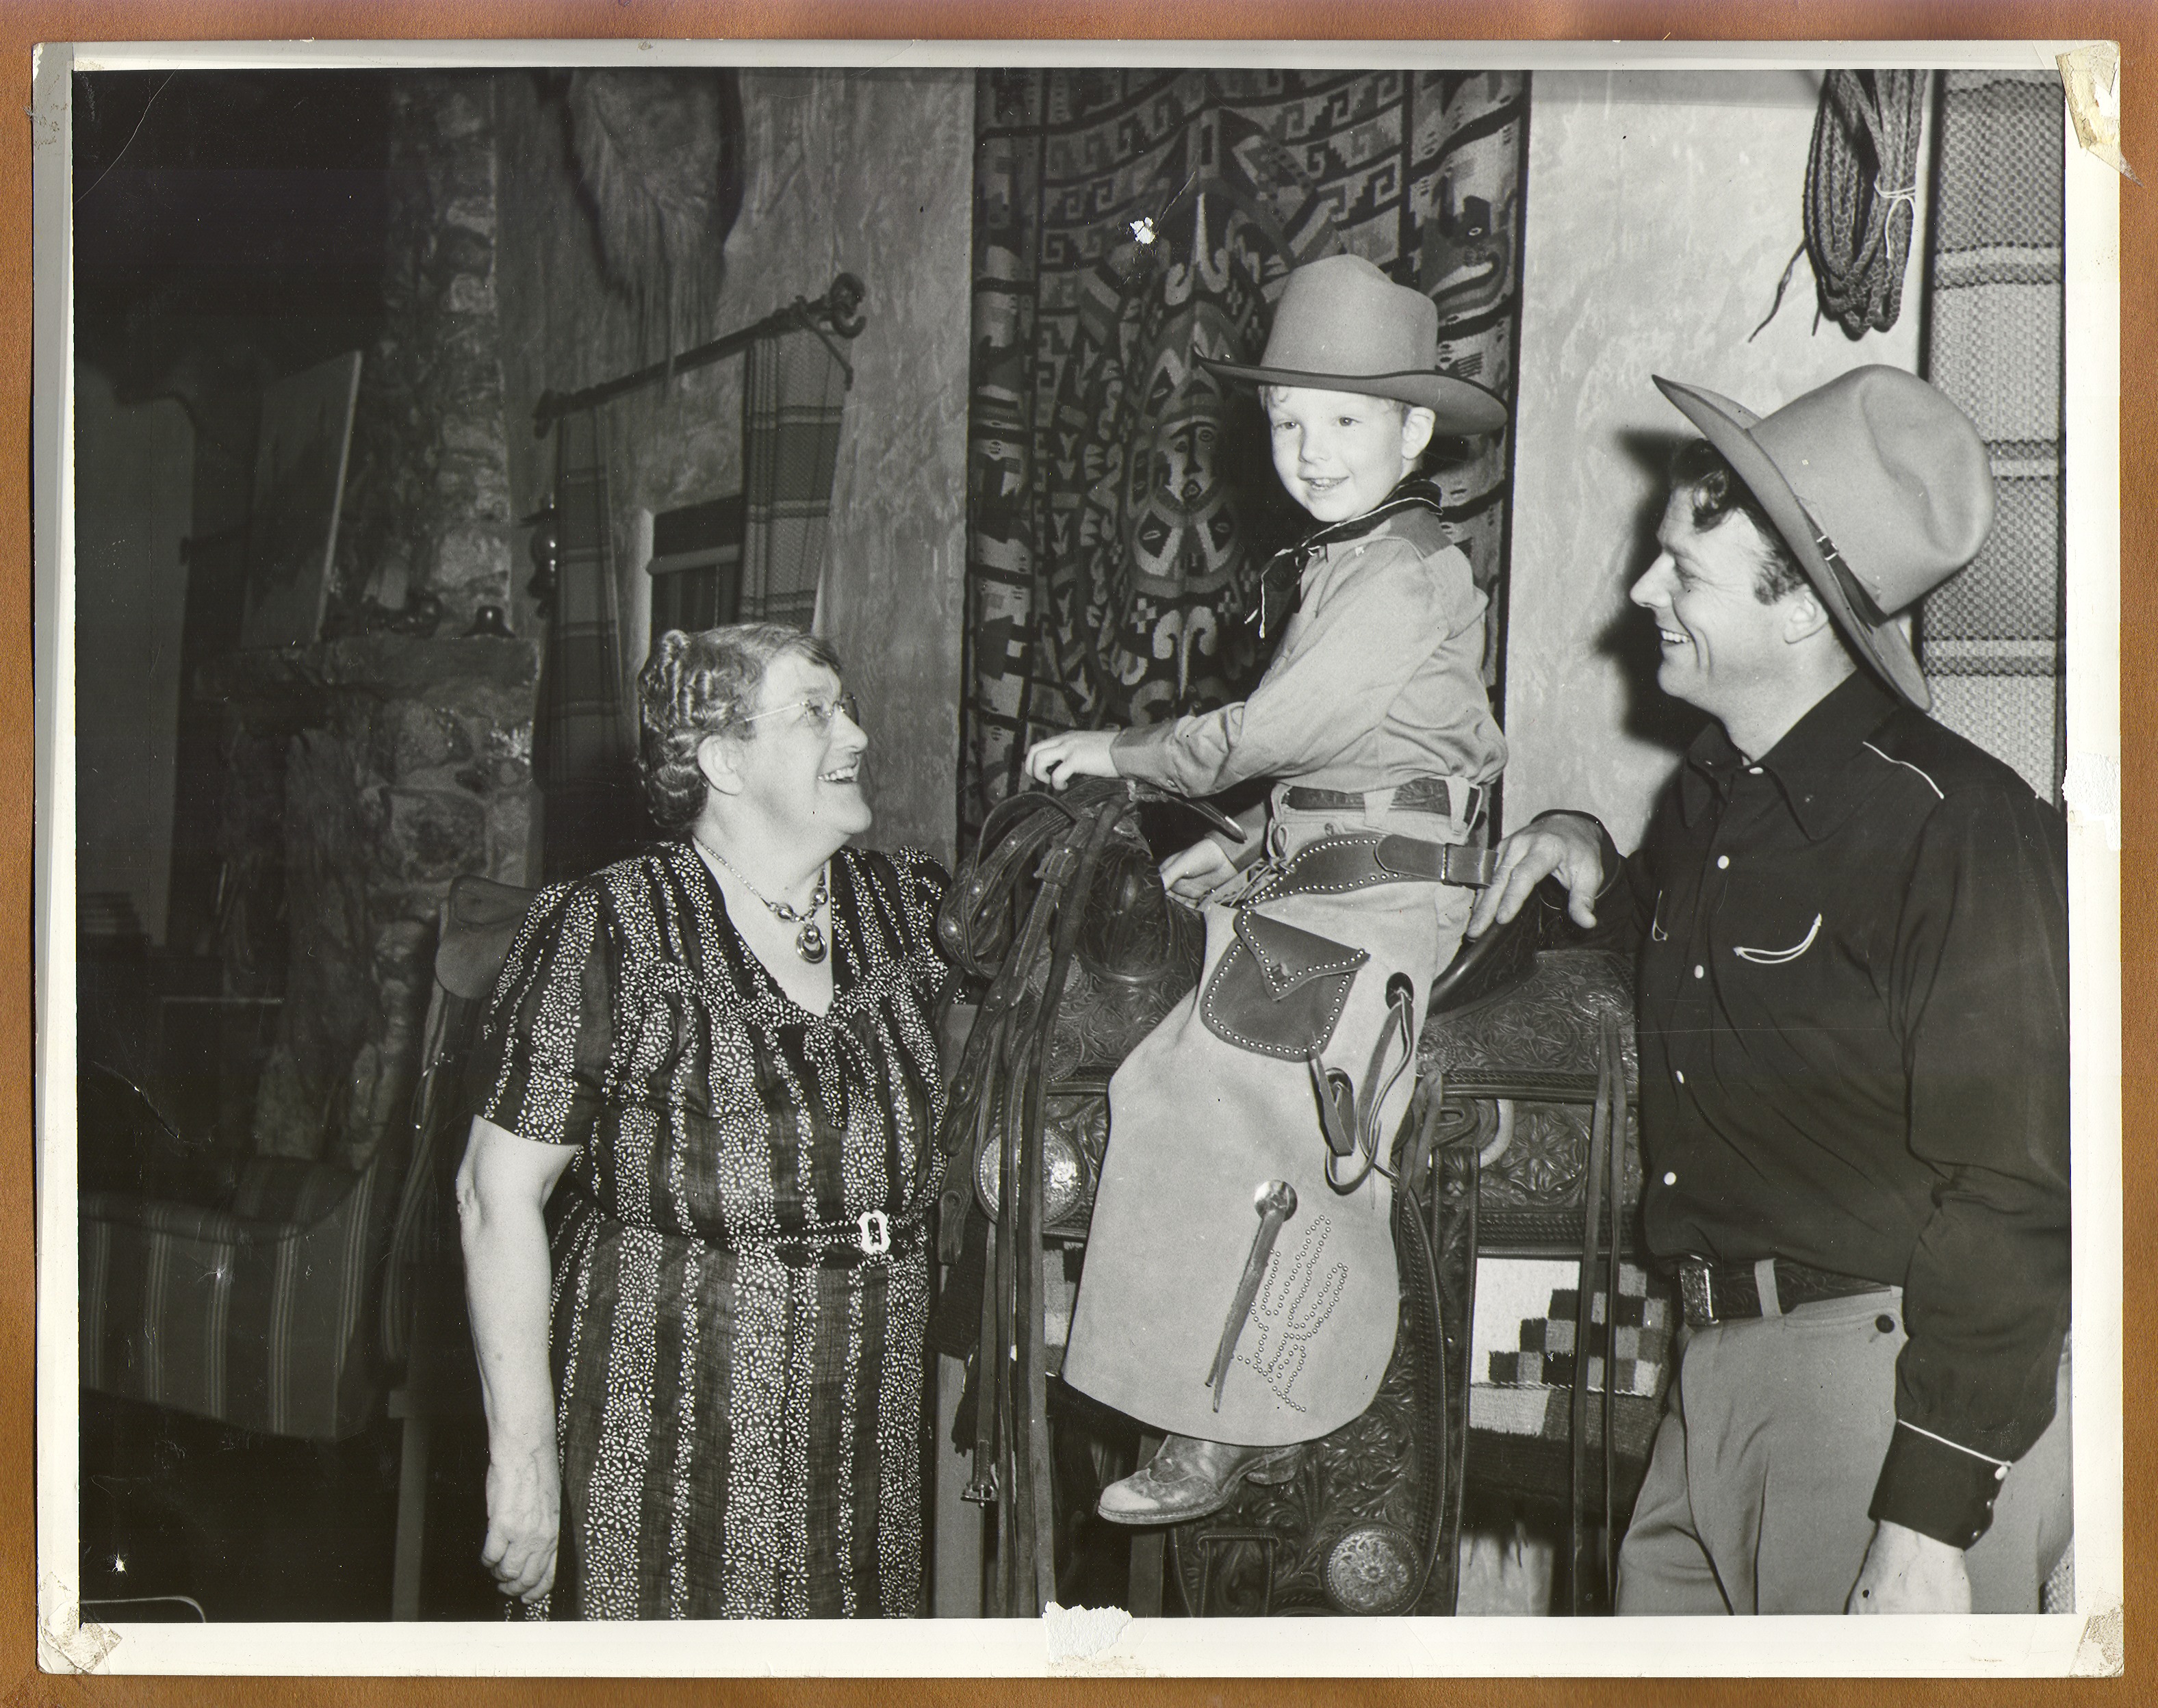 Rex Bell and Grandma Beldam with Rex Bell Jr. who is dressed in cowboy gear, seated on a saddle: photographic print